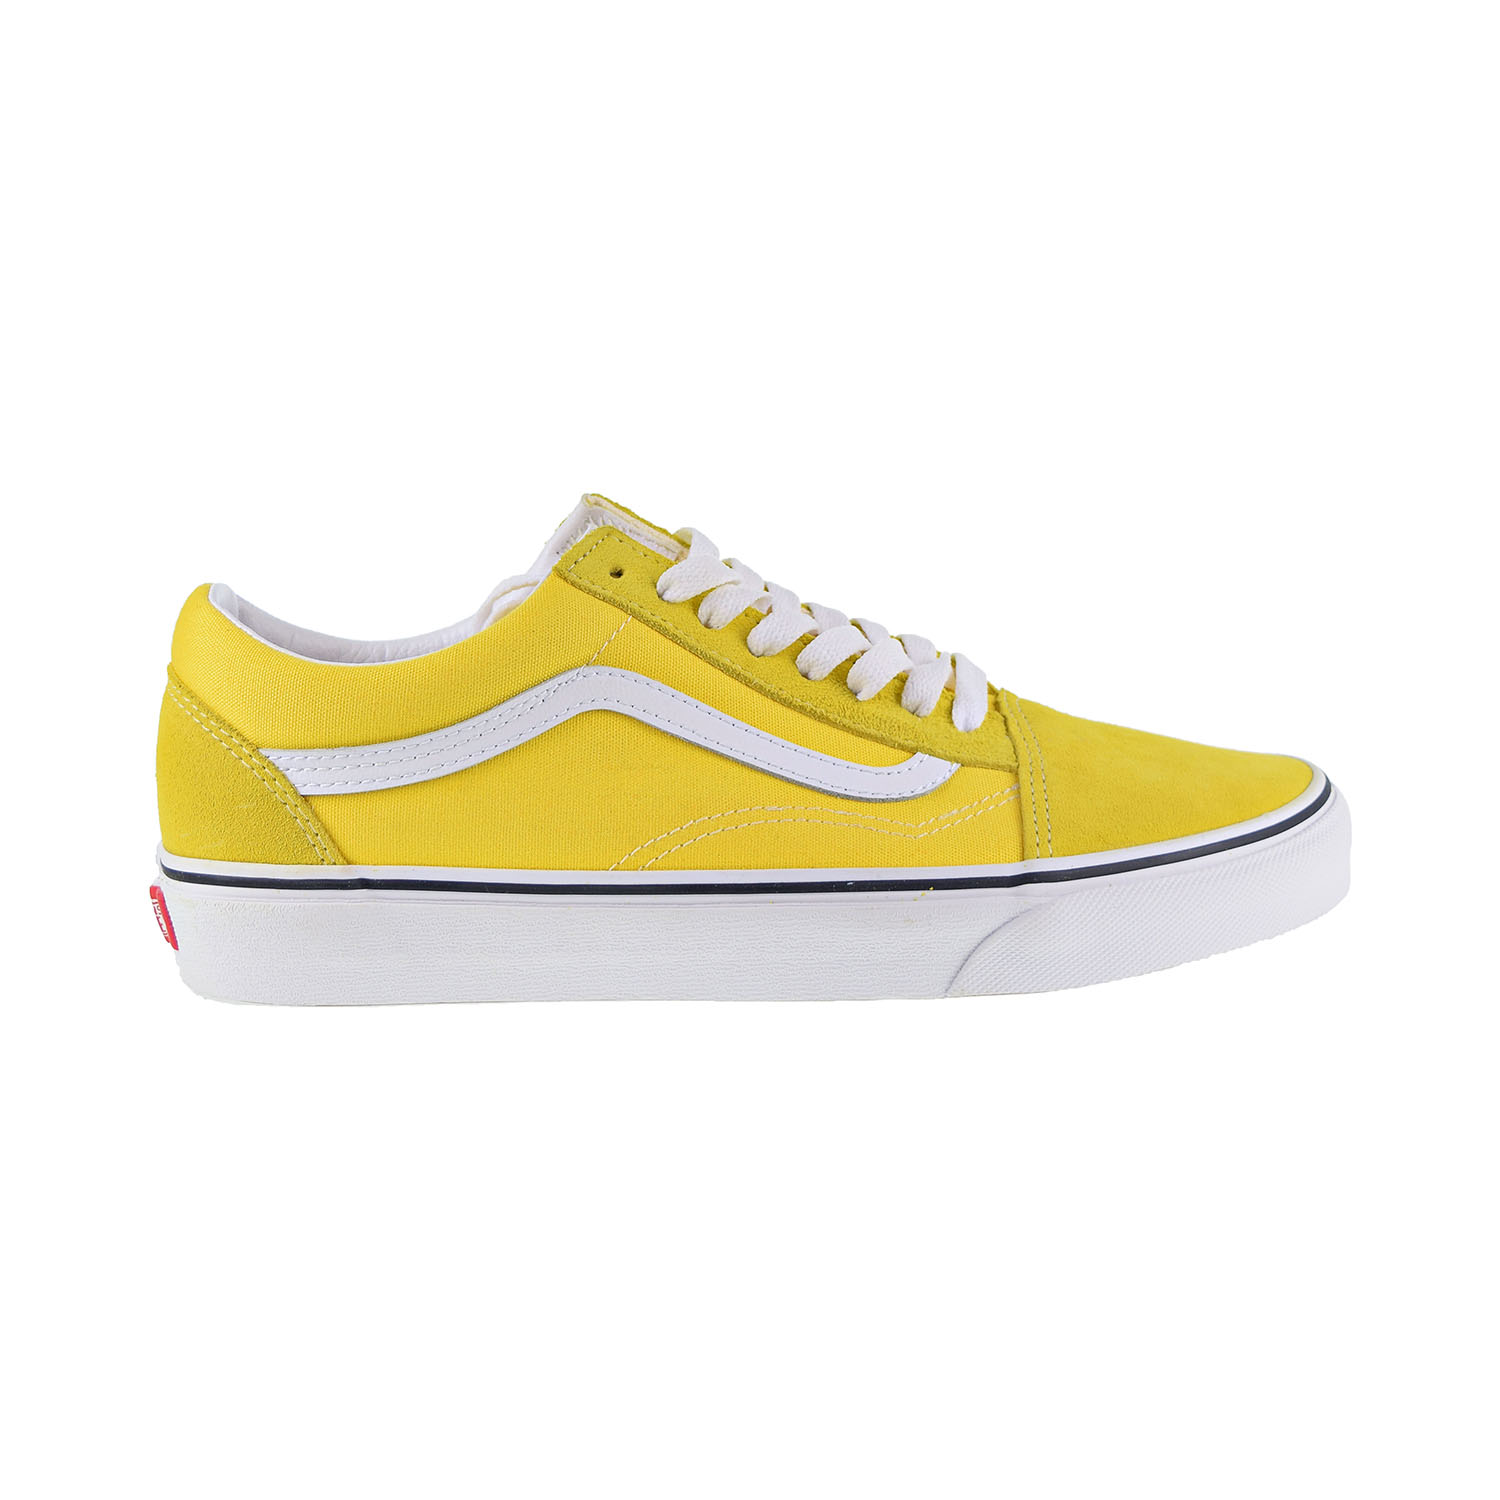 yellow and white old skool vans